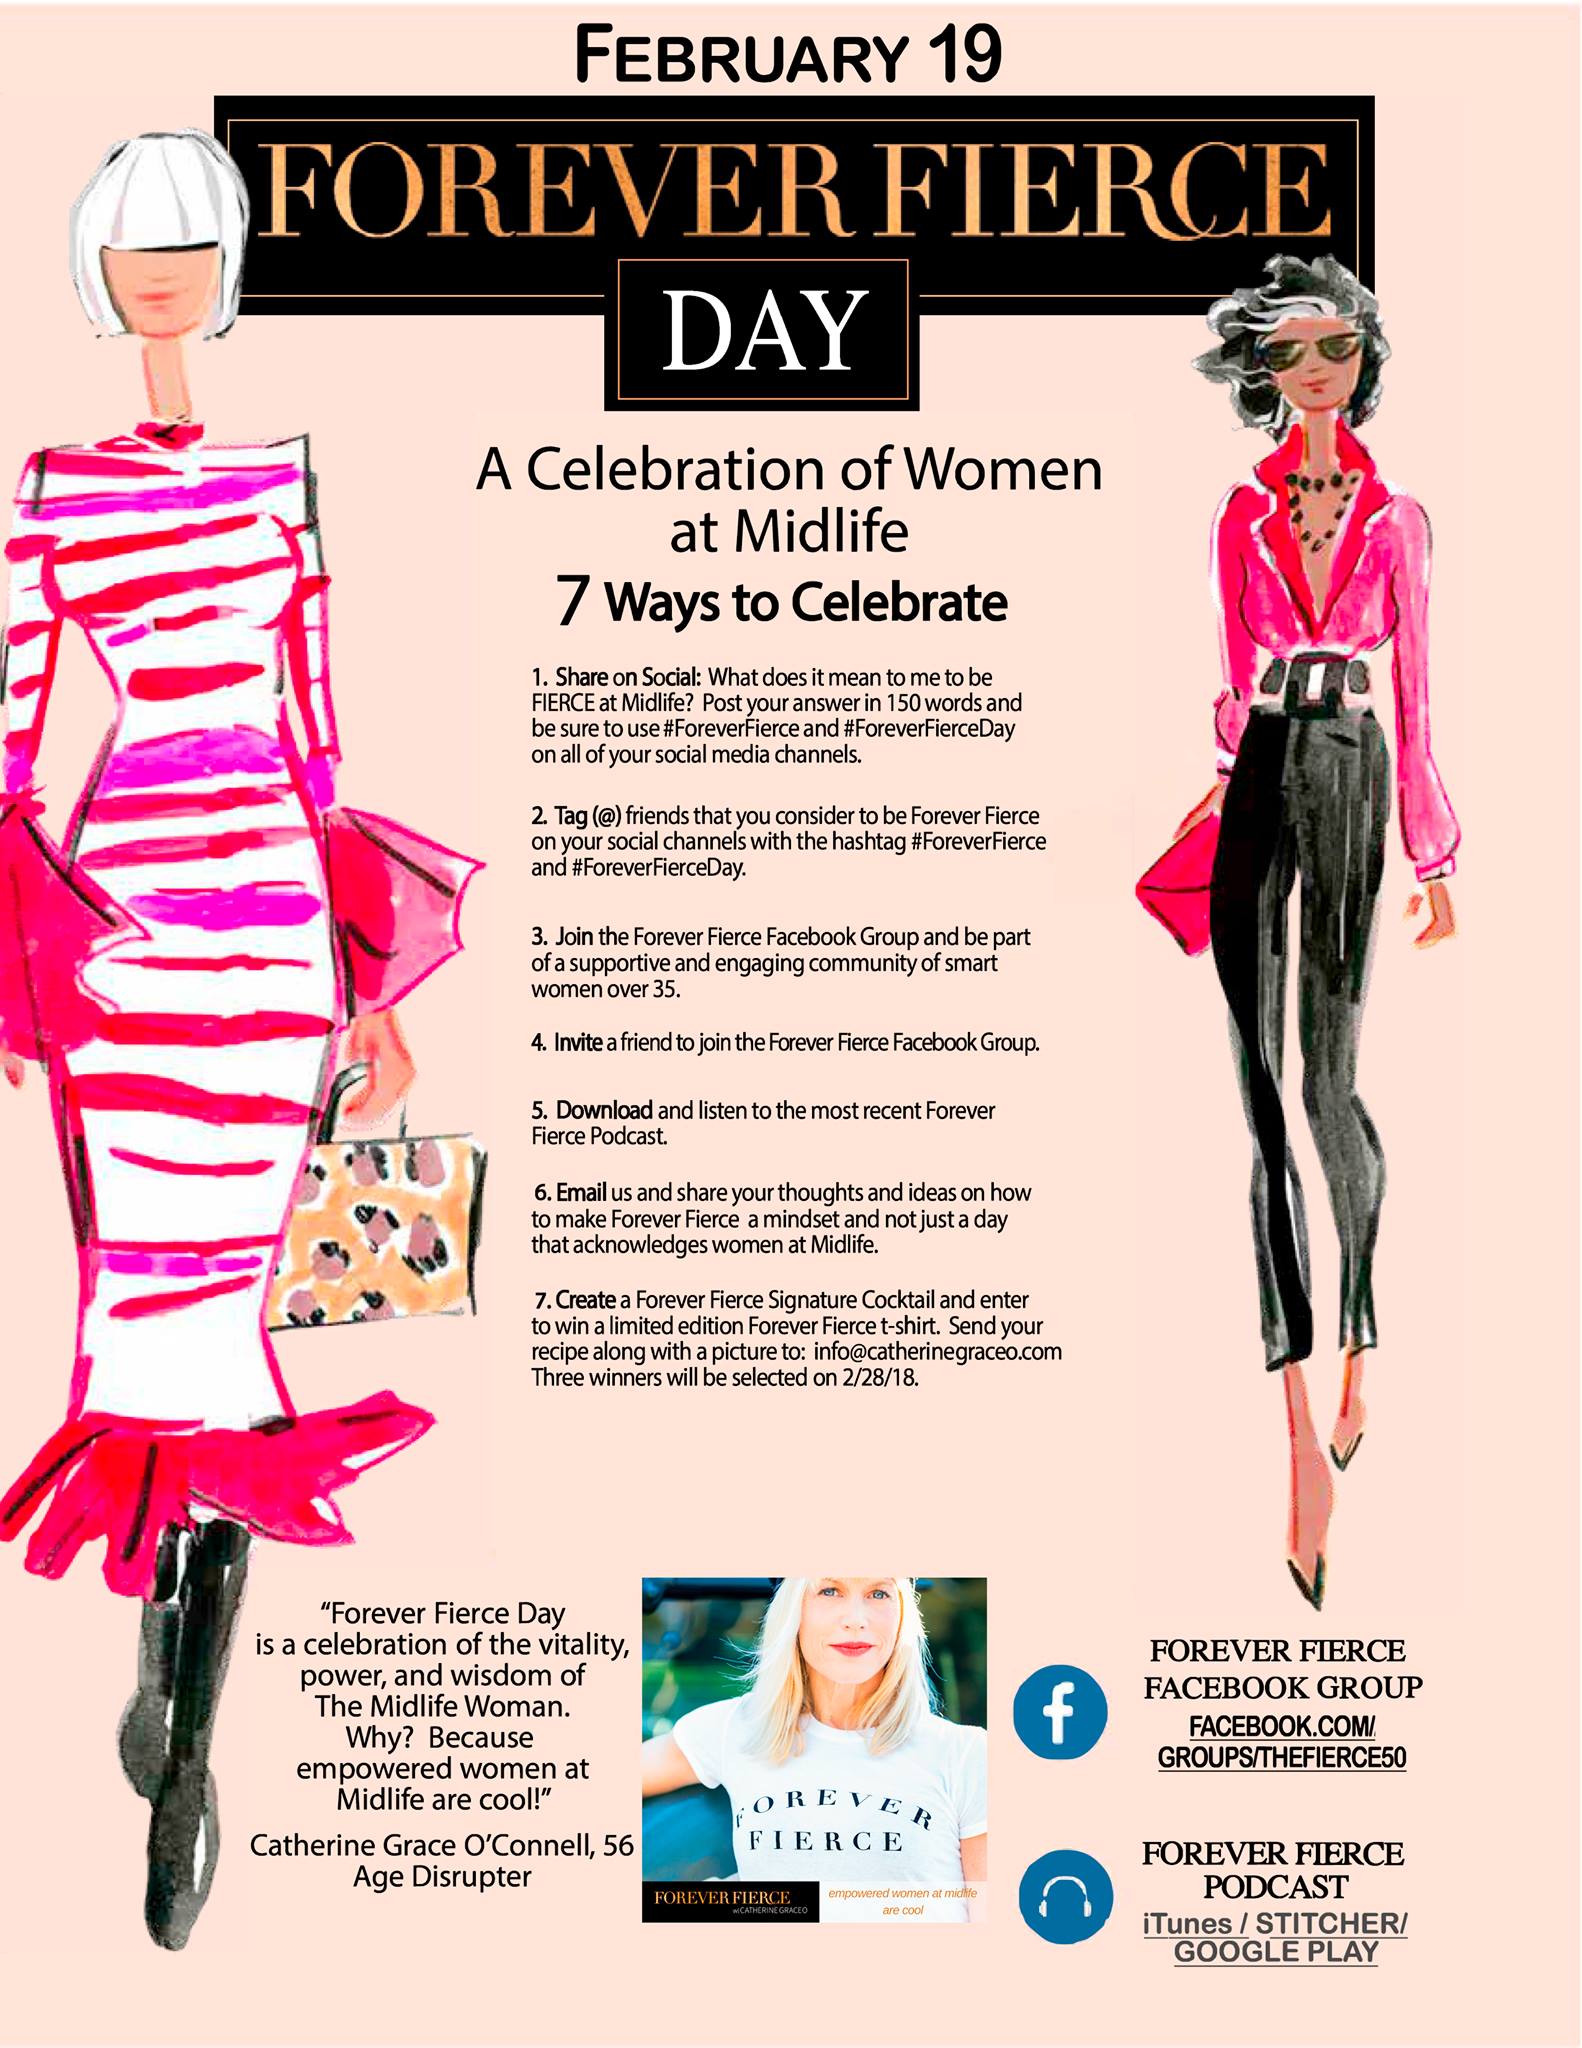 Infographic with ways to participate in Forever Fierce Day